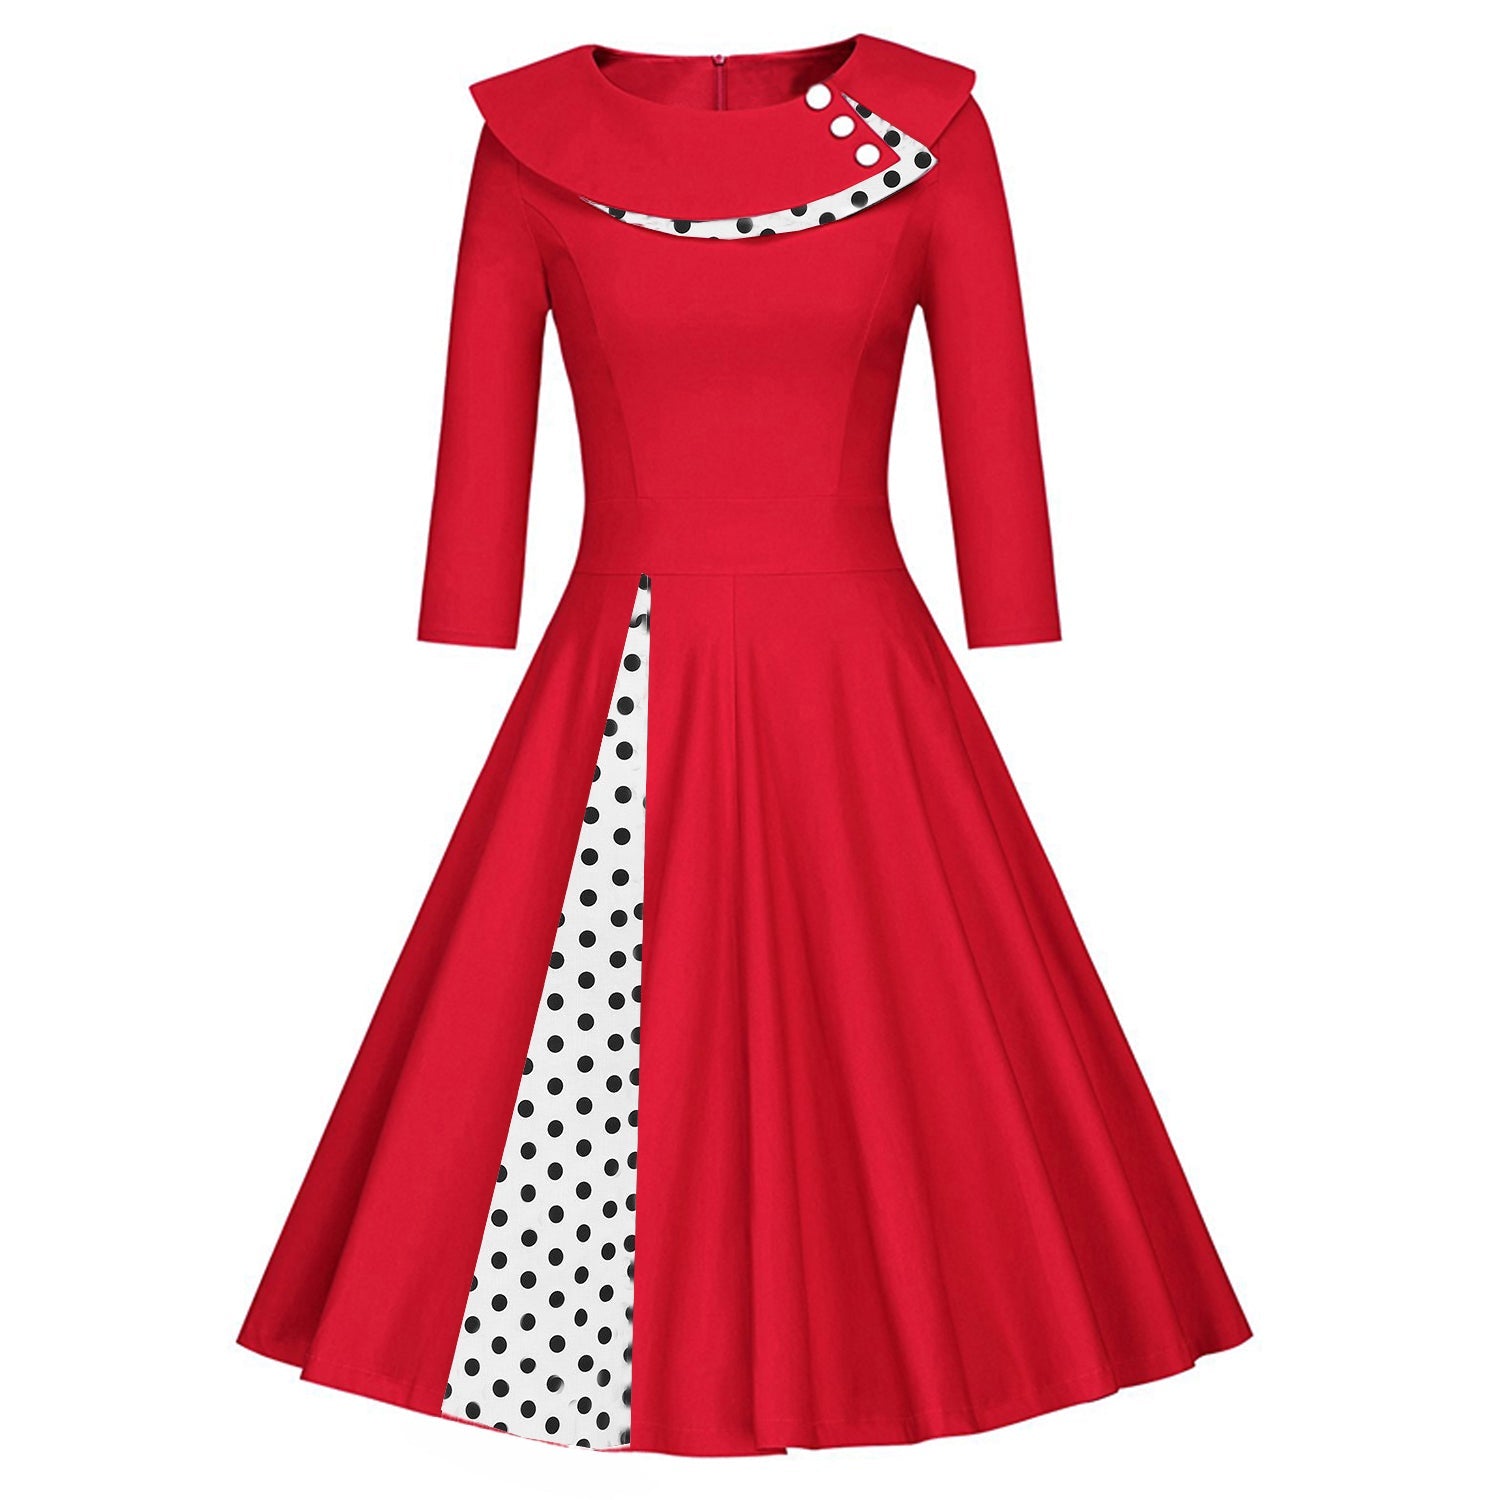 Womens 1950s Retro Rockabilly Princess Cosplay Dress Floral Halter Audrey Hepburn 50's 60's Party Costume Gown(S-2XL) Sai Feel